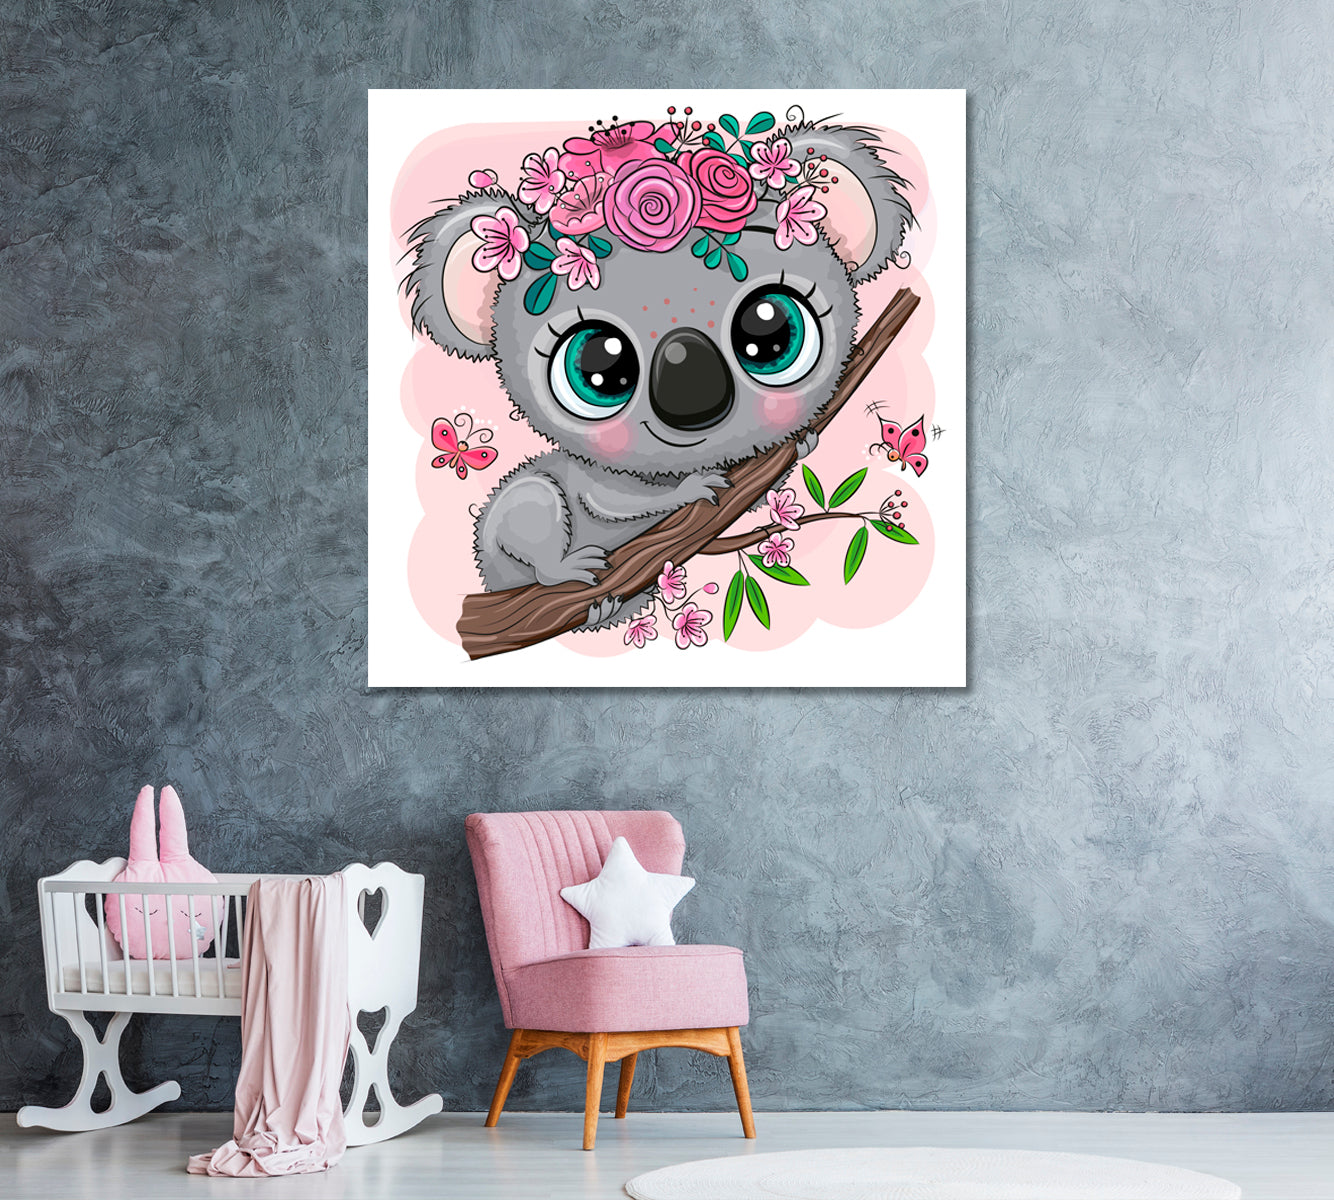 Cute Koala with Flowers Canvas Print ArtLexy 1 Panel 12"x12" inches 